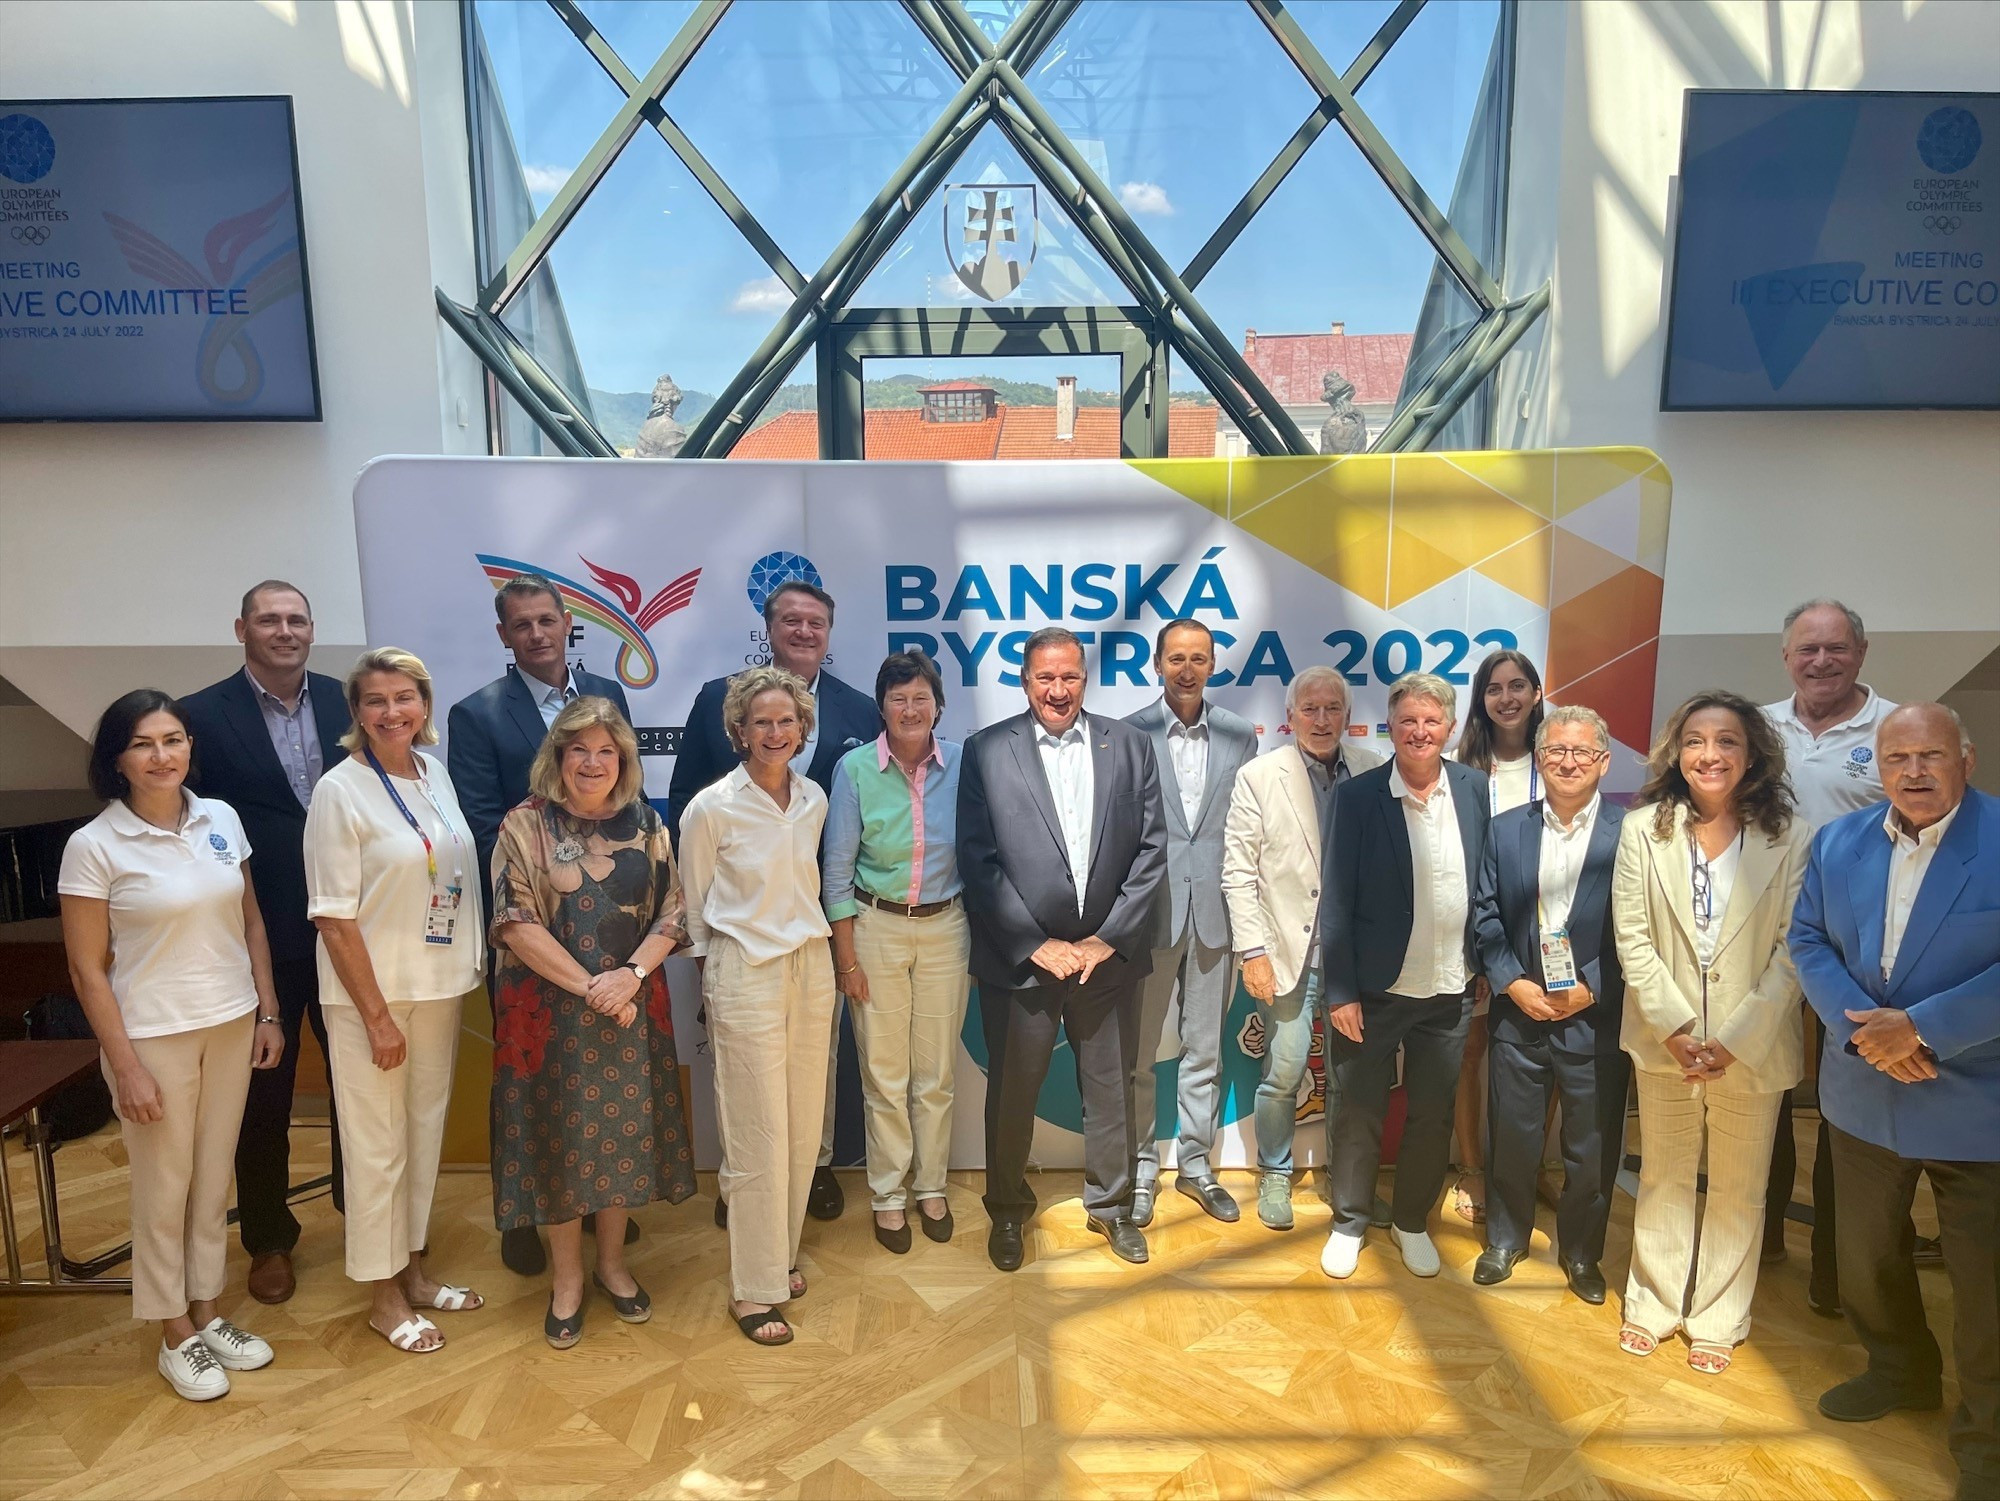 The EOC Executive Committee agreed on the dates at its meeting in Banská Bystrica ©EYOF Banská Bystrica 2022